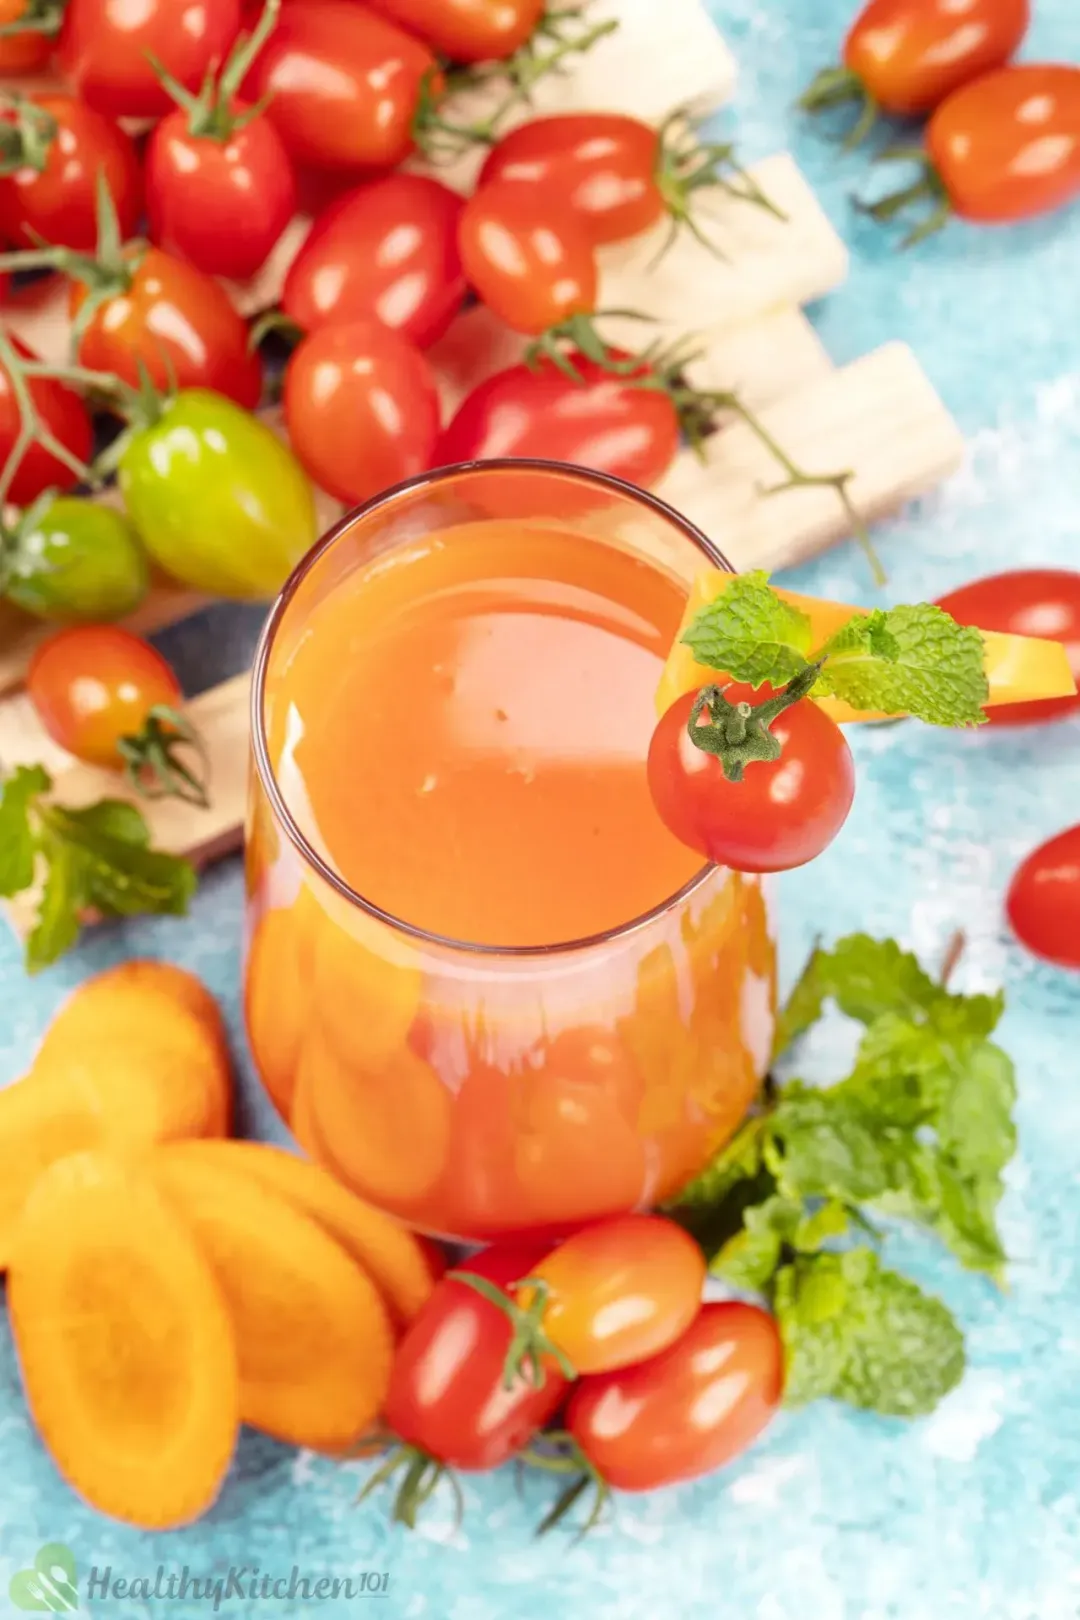 How Long Does Carrot Tomato Juice Last